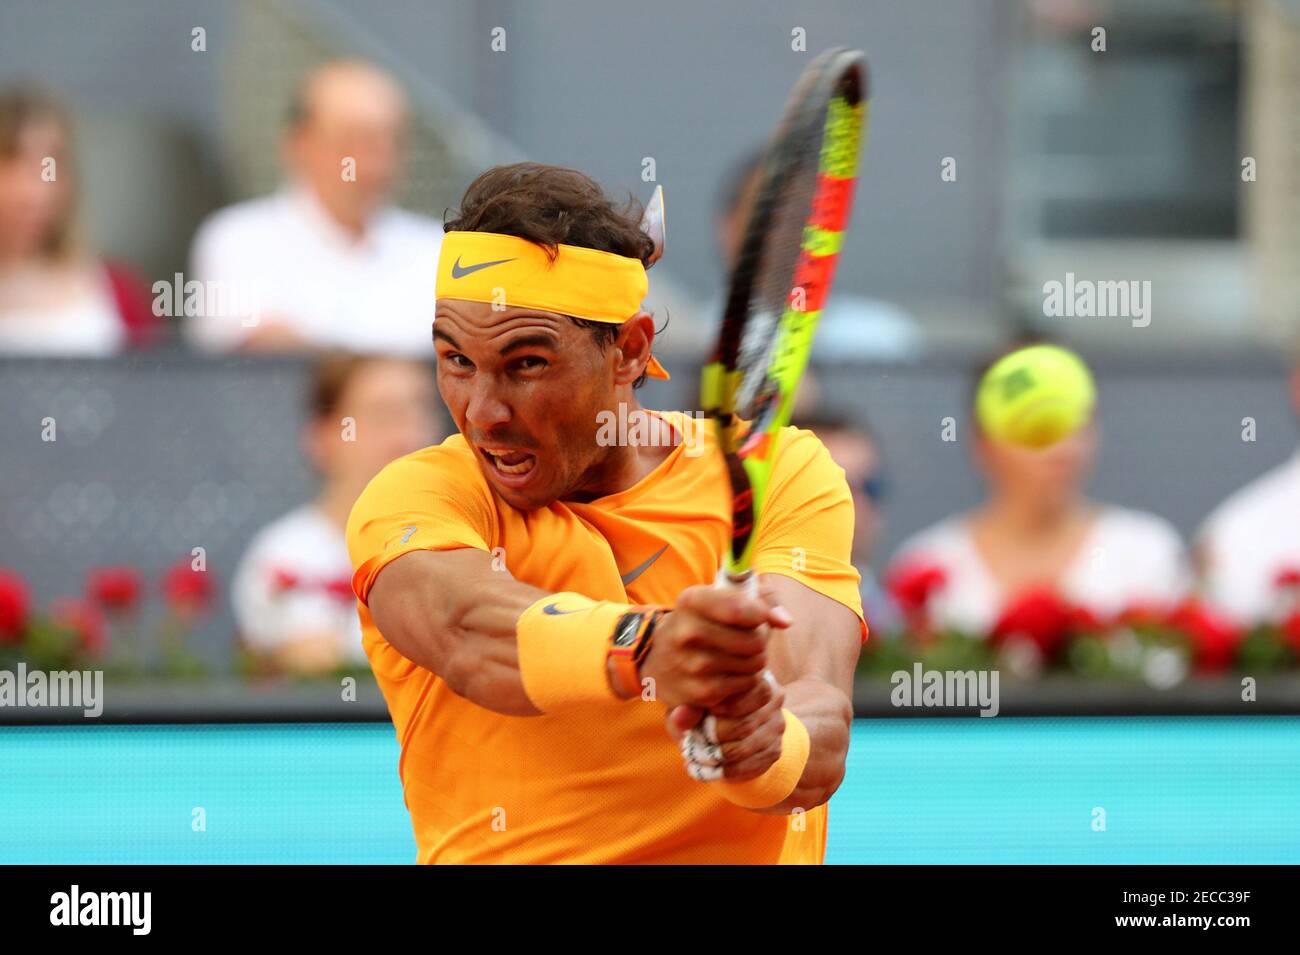 Tennis - ATP 1000 - Madrid Open - Madrid, Spain - May 11, 2018 Spain's  Rafael Nadal in action during the quarter final match against Austria's  Dominic Thiem REUTERS/Sergio Perez Stock Photo - Alamy